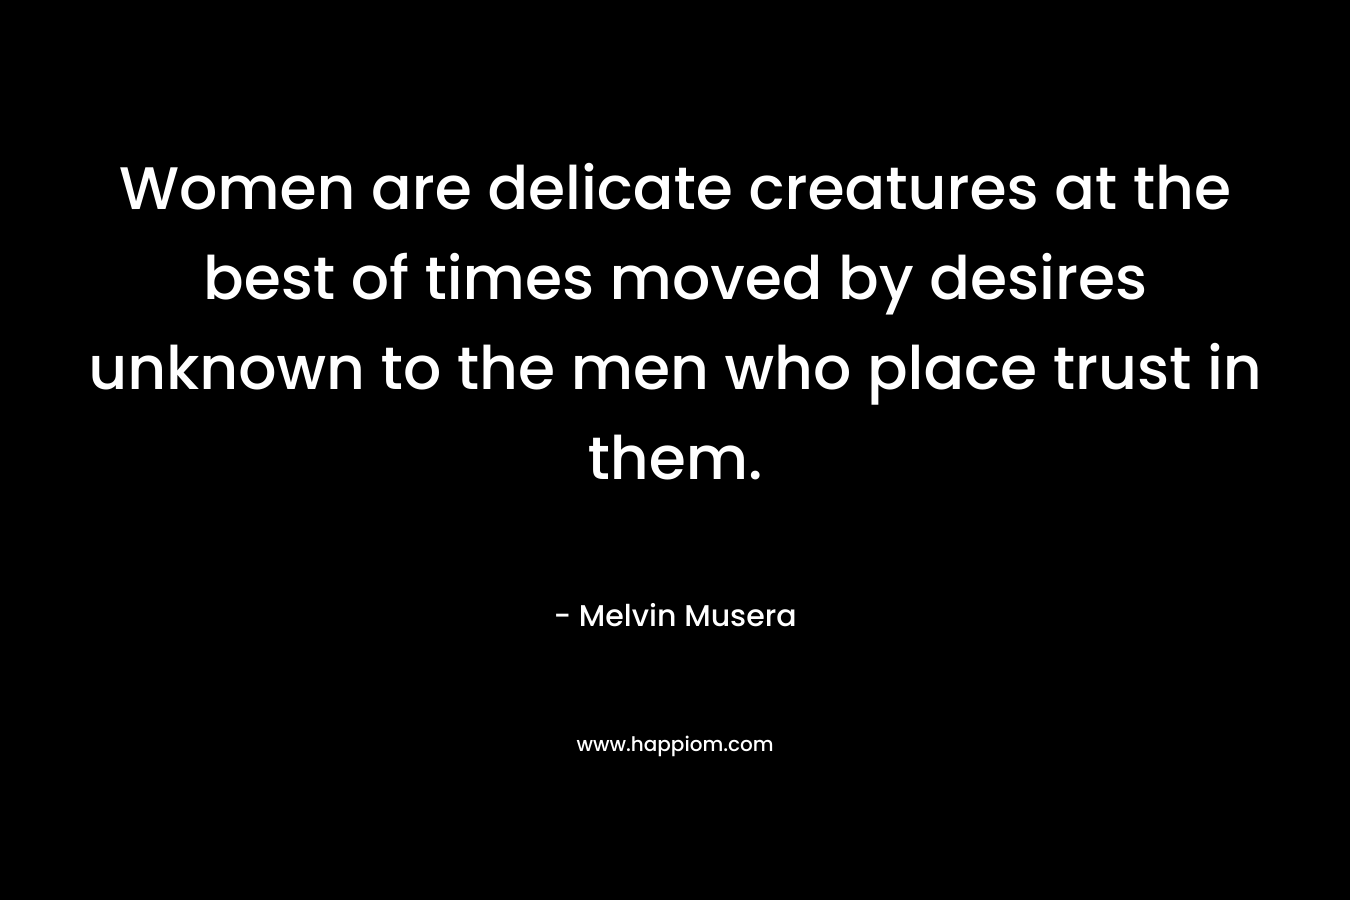 Women are delicate creatures at the best of times moved by desires unknown to the men who place trust in them.